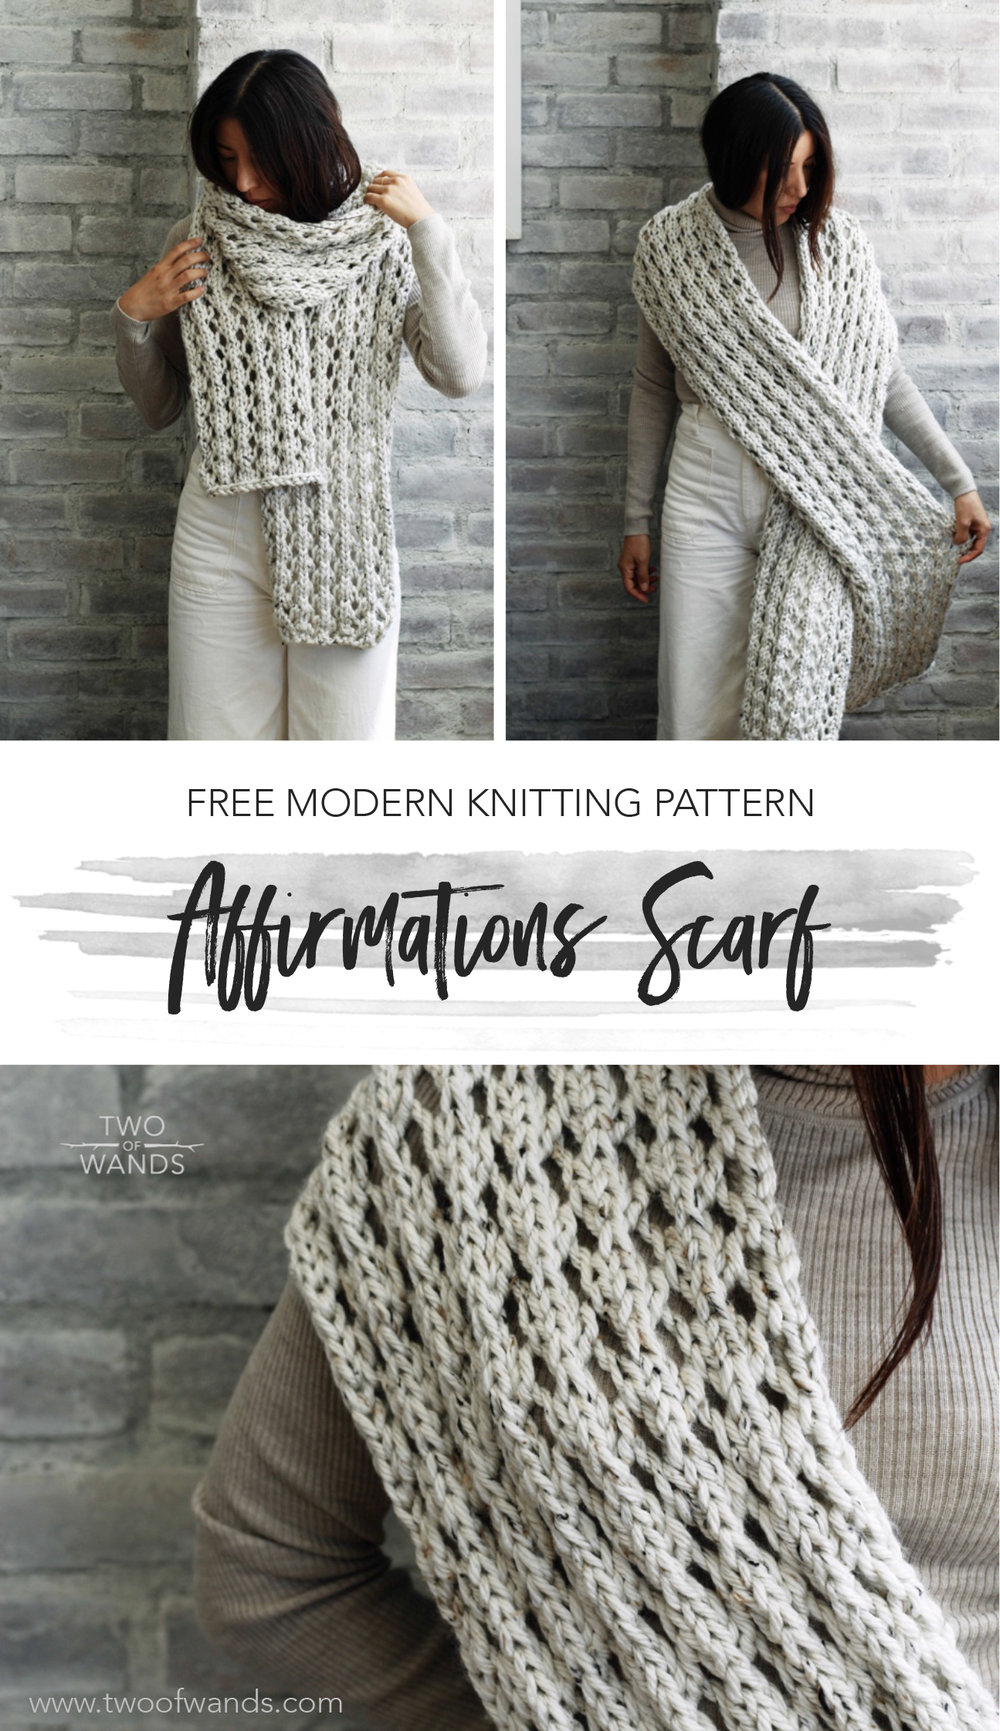 Affirmations Scarf pattern by Two of Wands